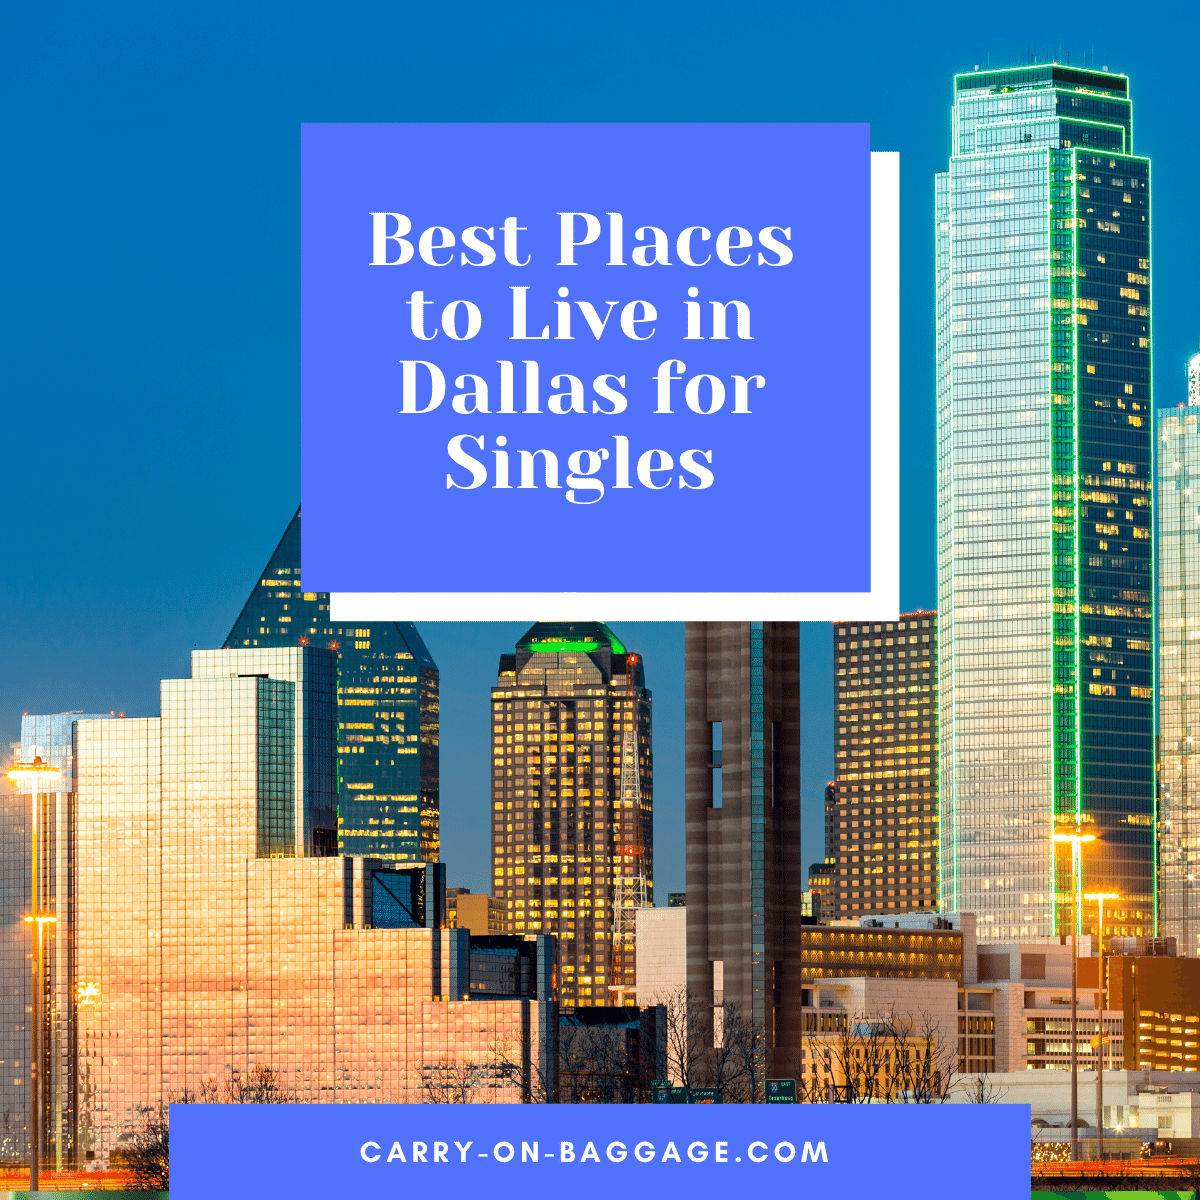 Best Places to Live in Dallas for Singles